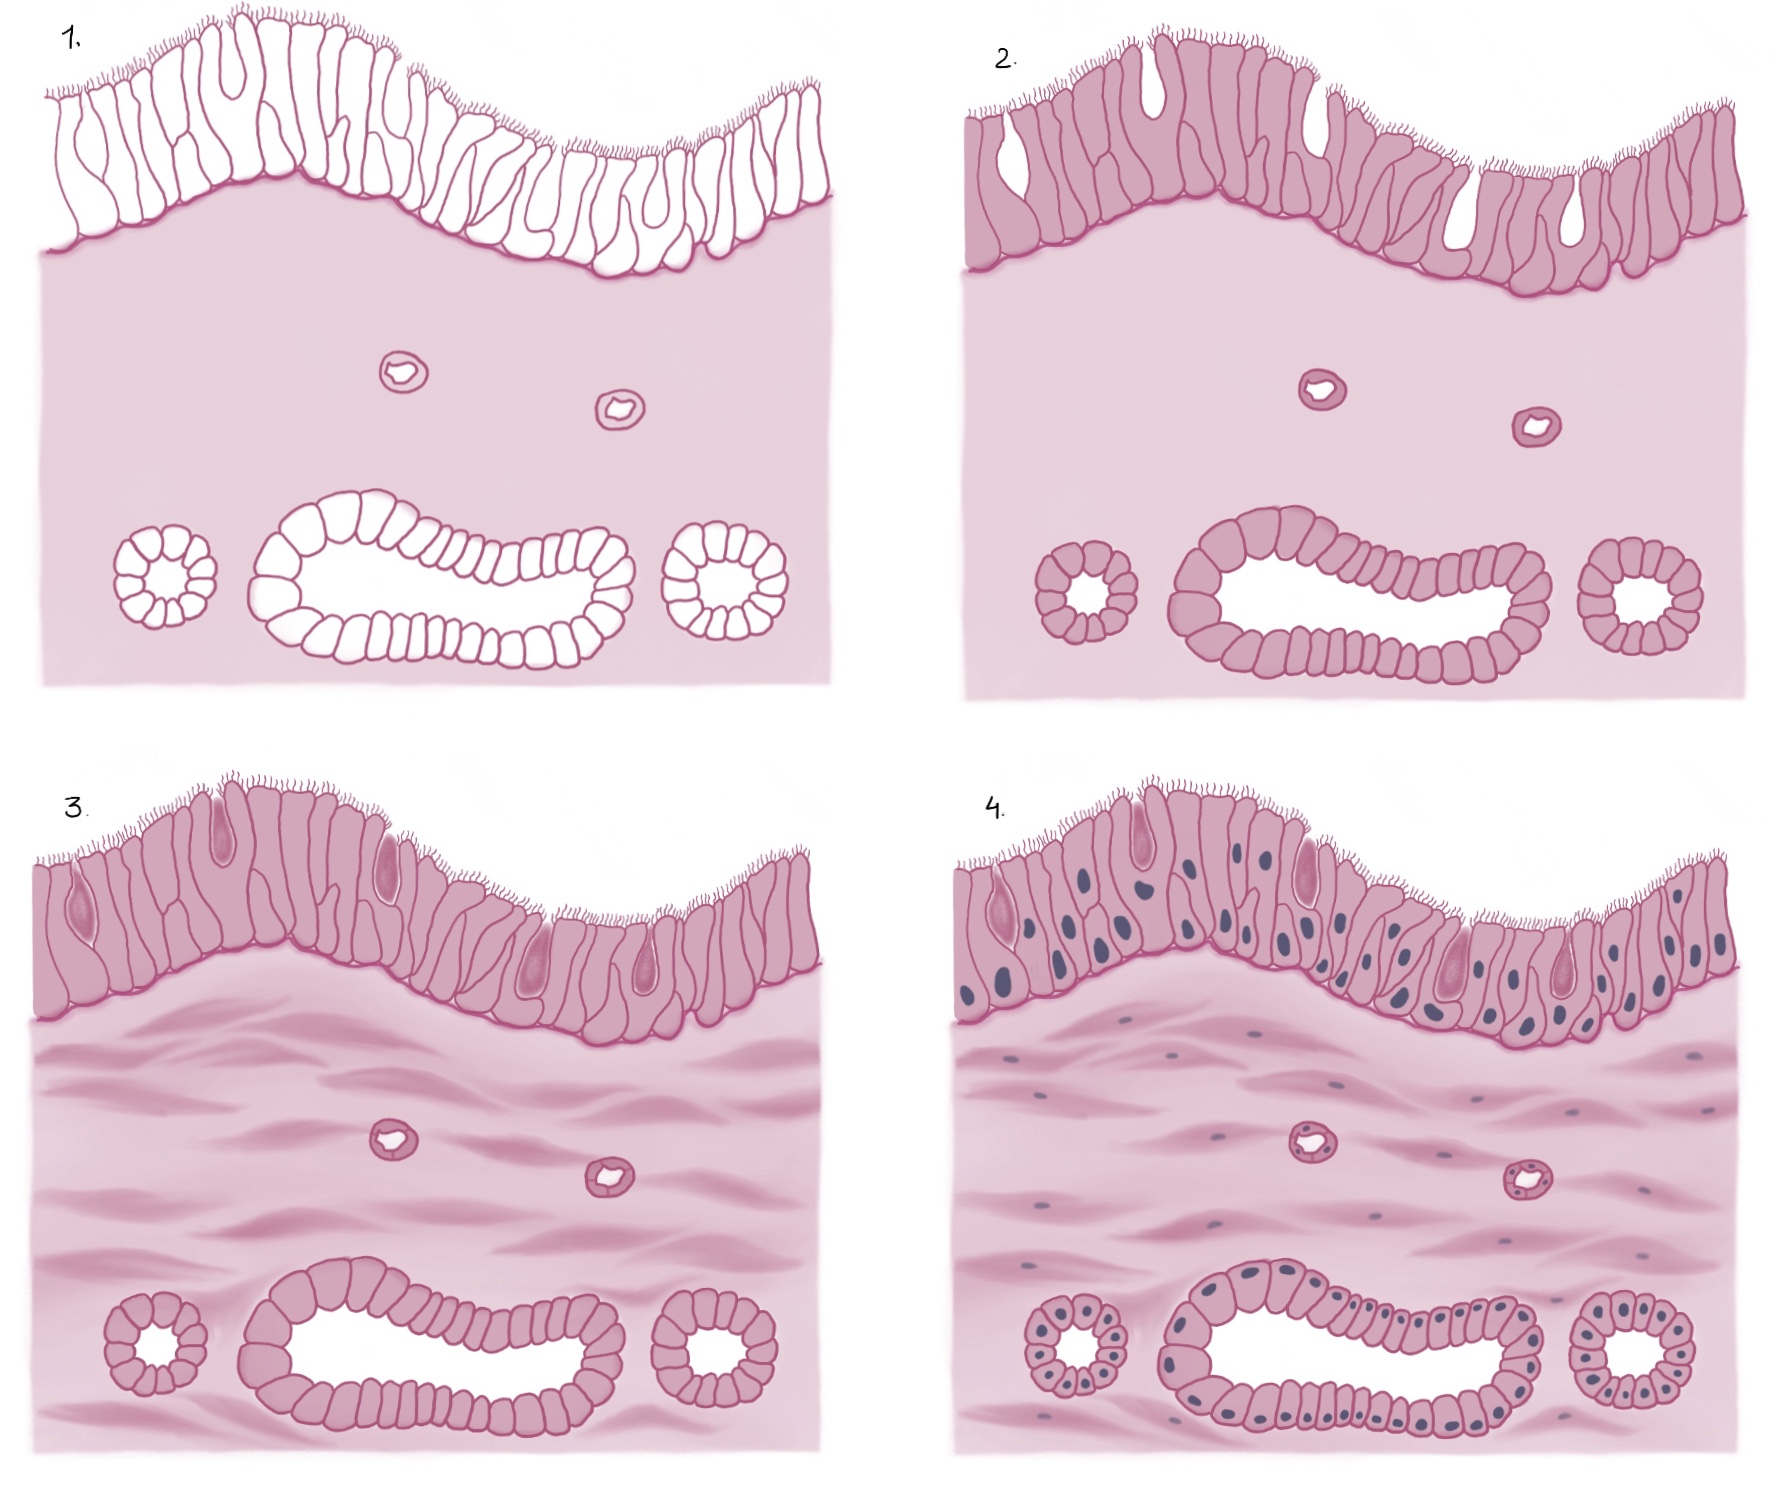 Steps for drawing Pseudo-stratified columnar epithelium